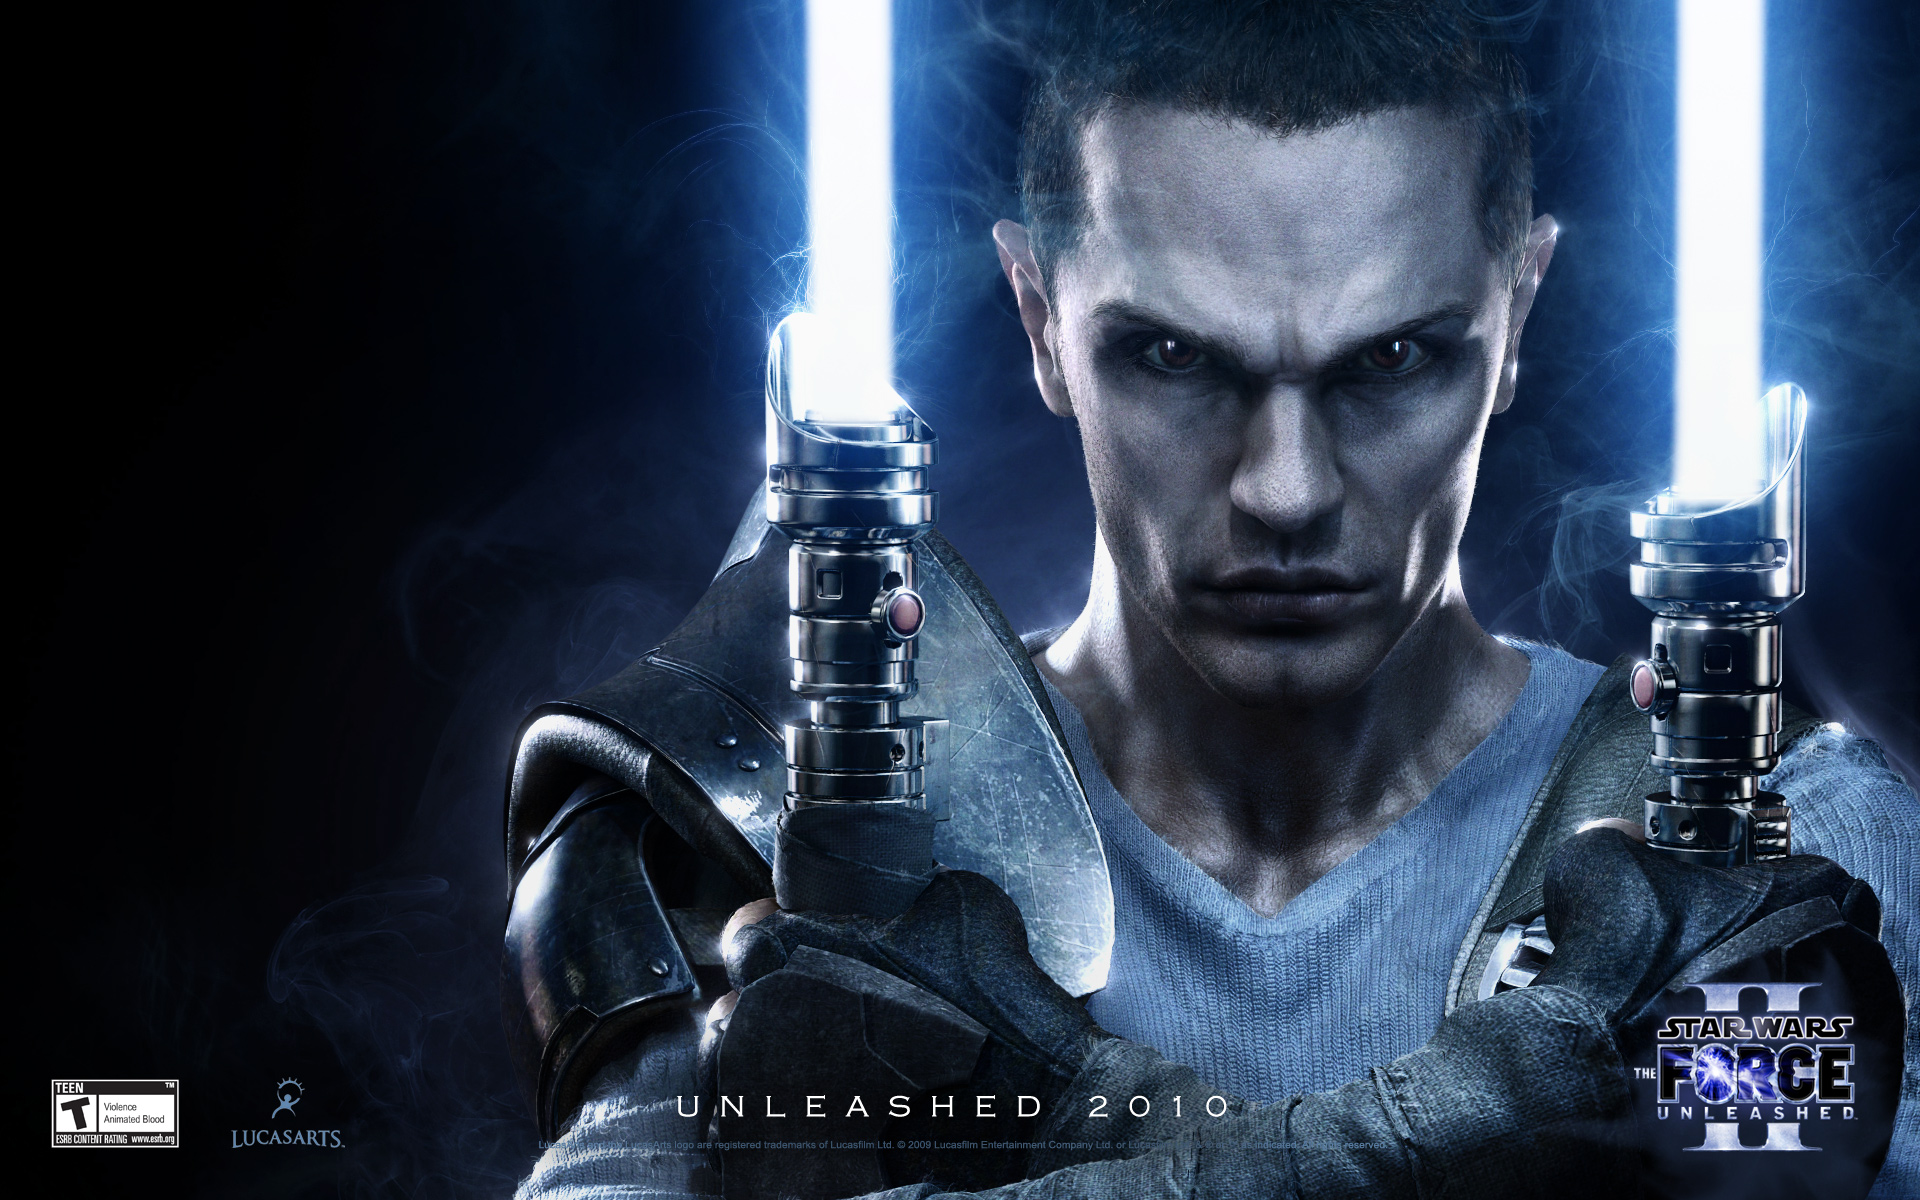 Wallpaper 3 Wallpaper From Star Wars The Force Unleashed